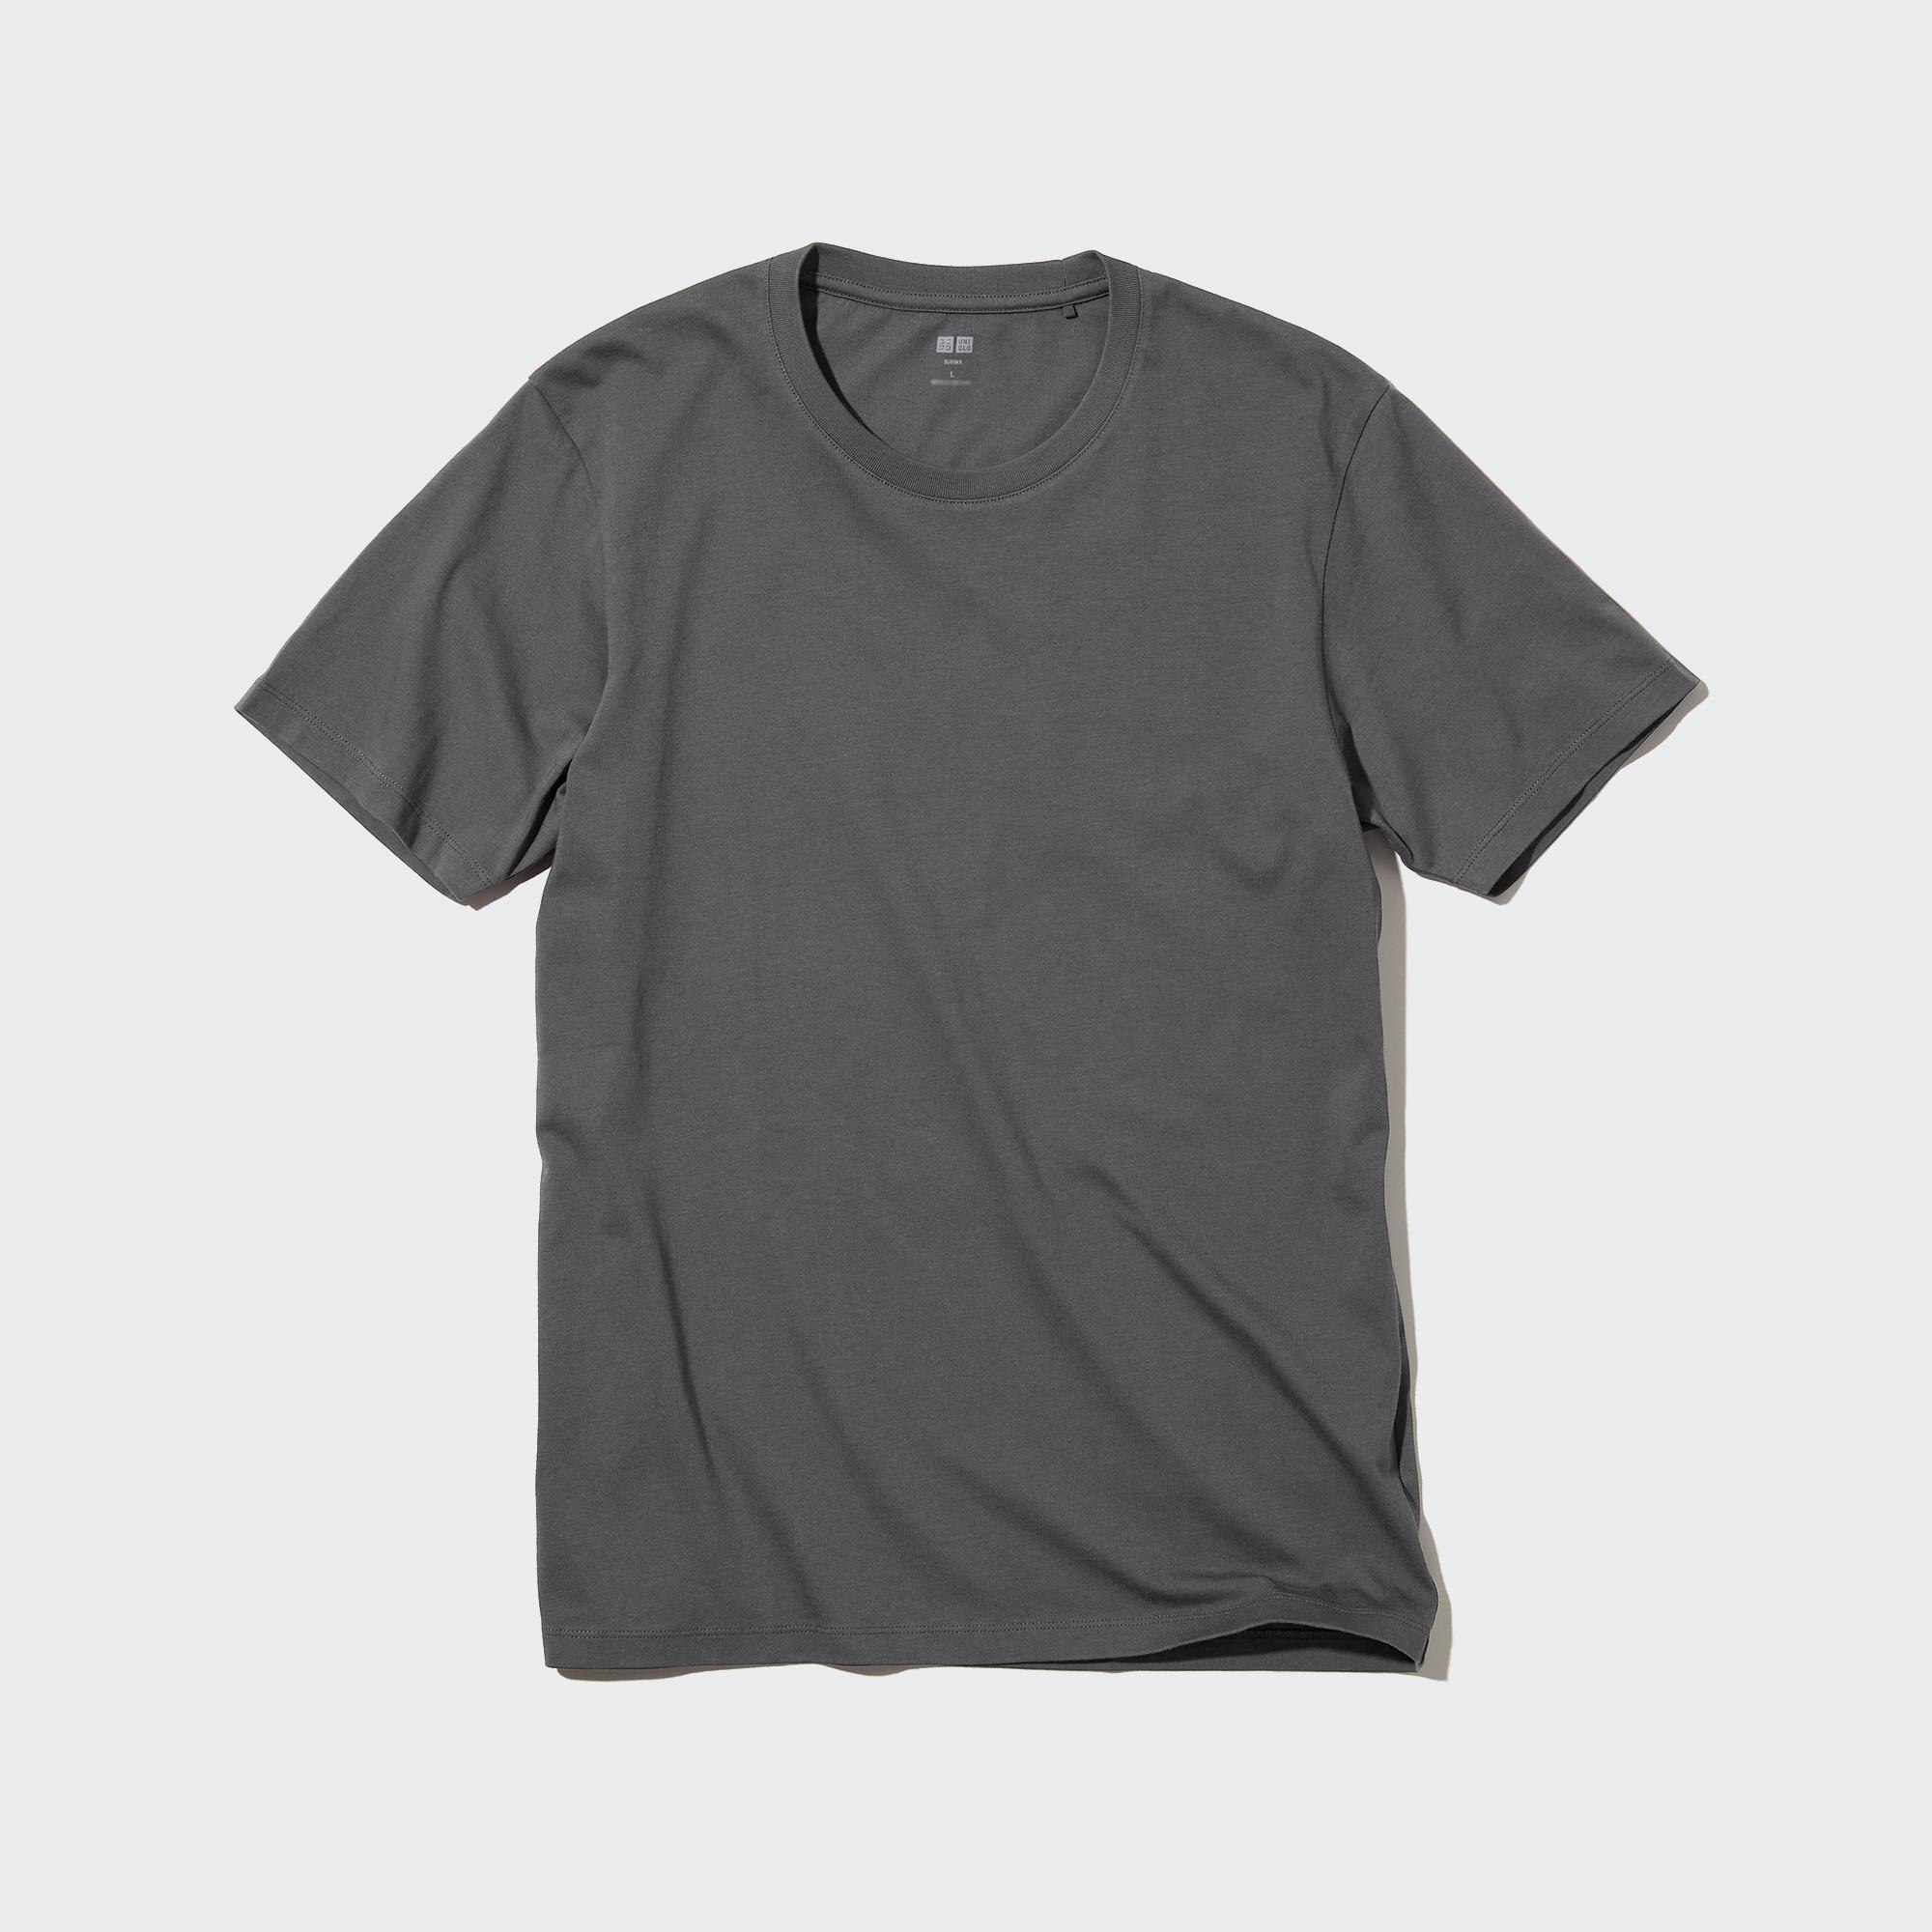 Good Tee Hunting the Quest for the Perfect Modern TShirt  From Squalor  to Baller